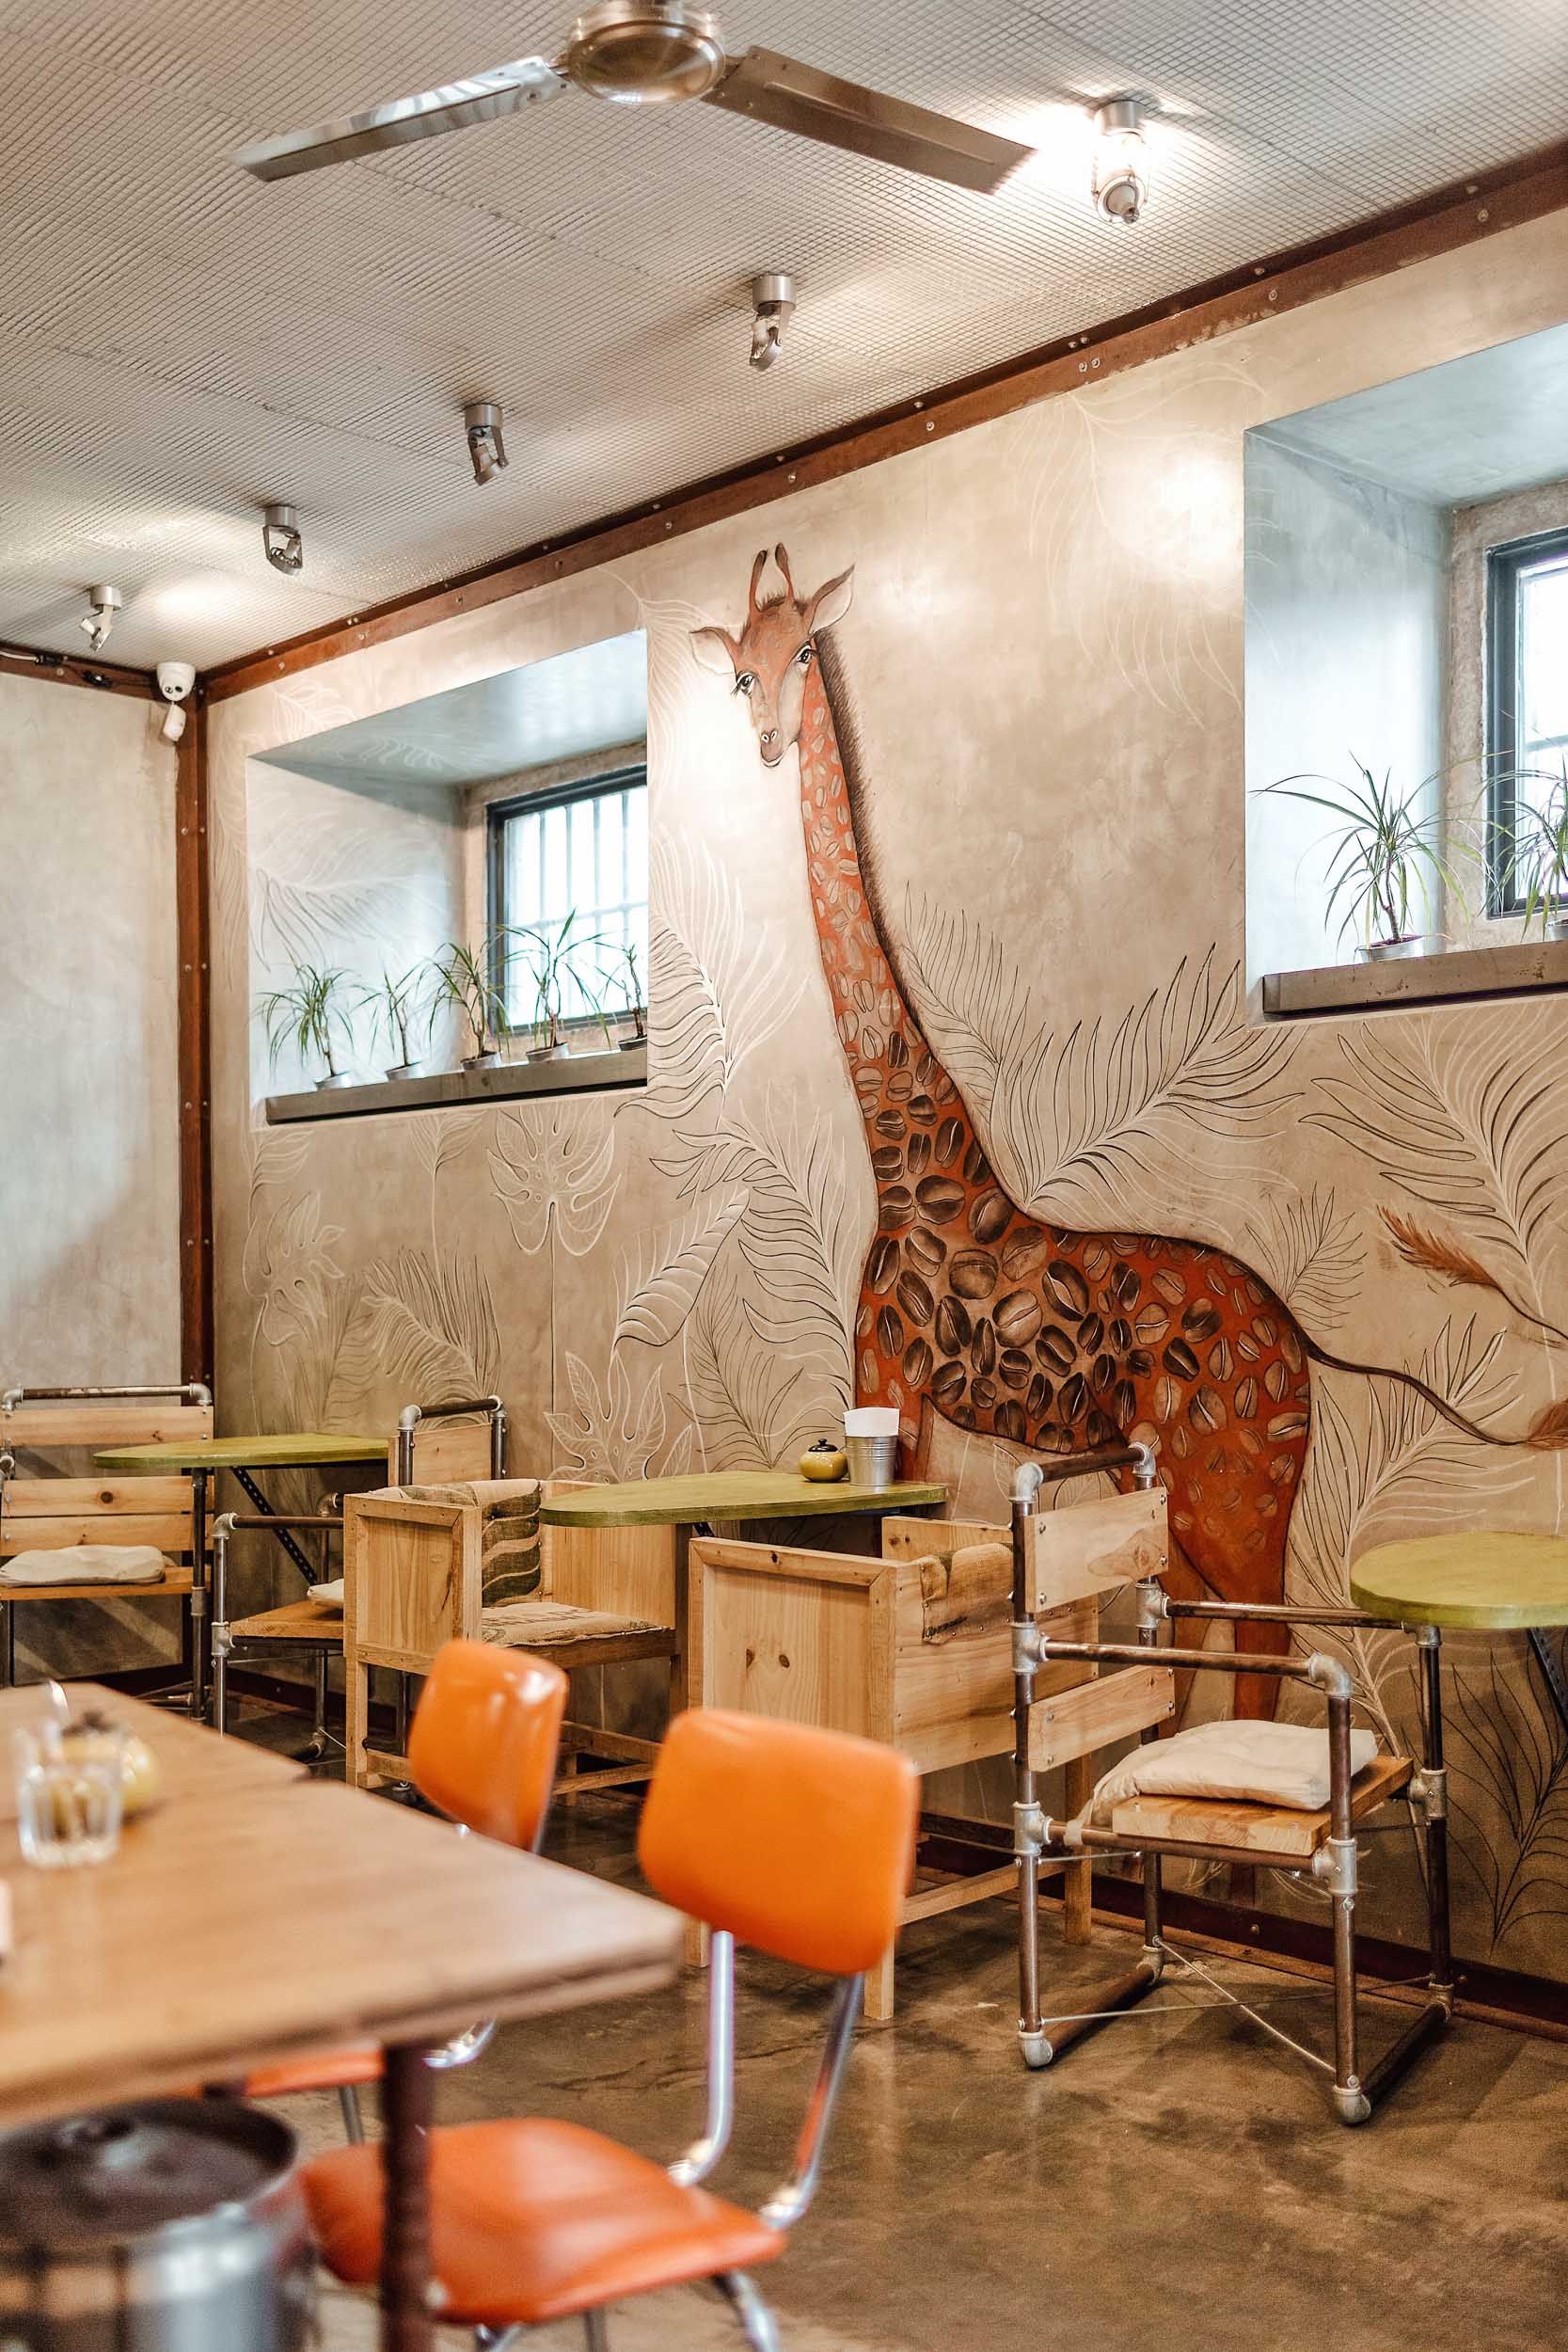 The interior of Fabrica Coffee Rosters in Lisbon.  The giraffe's spots are coffee beans!